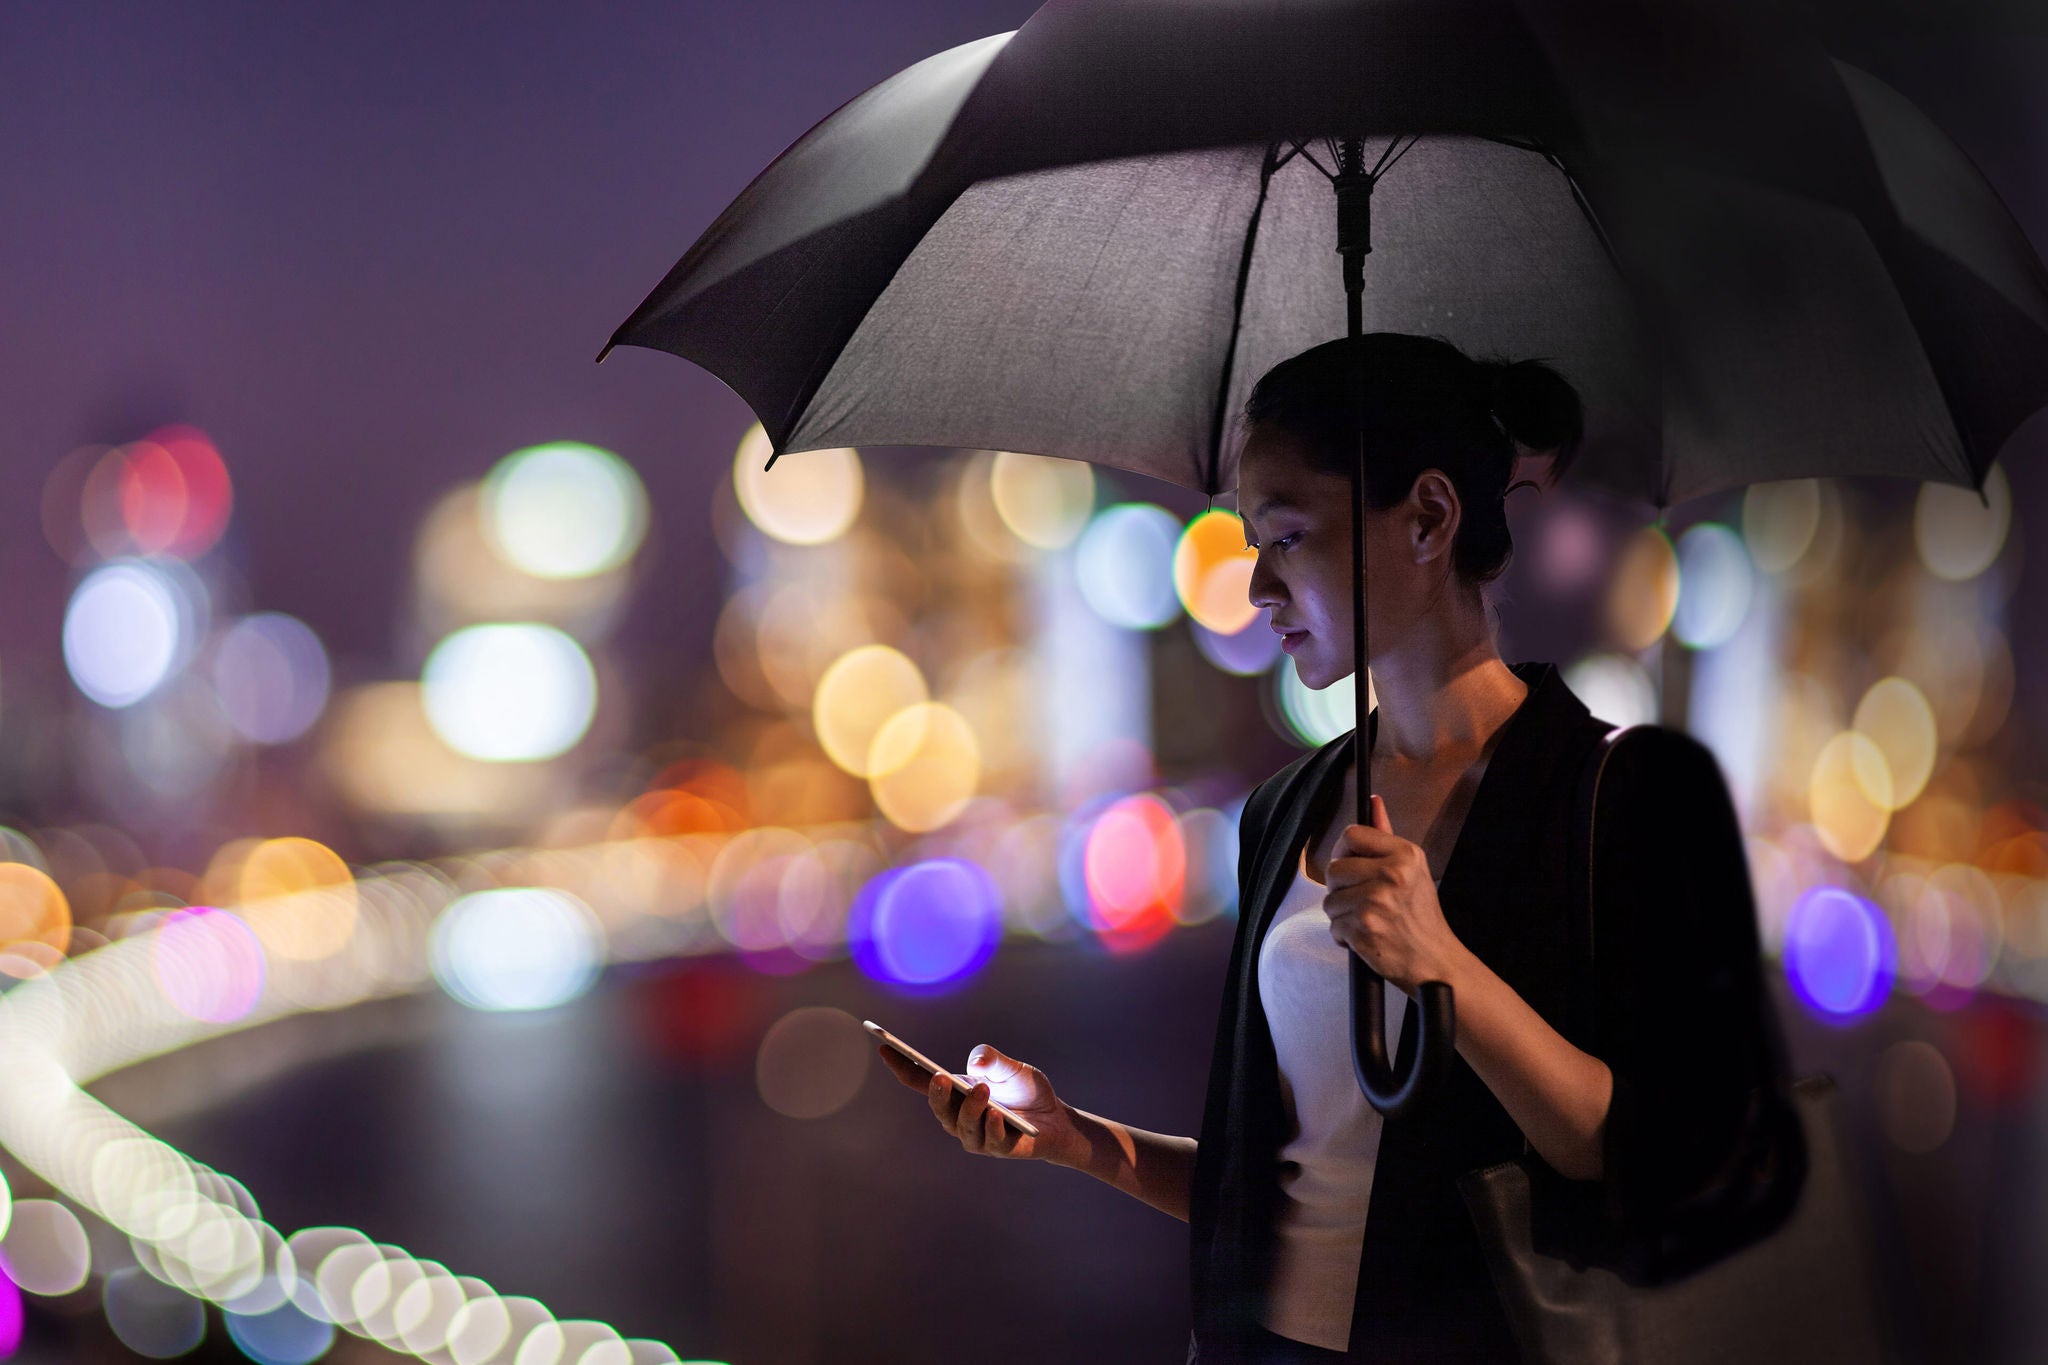 Woman holding an umbrella and using phone